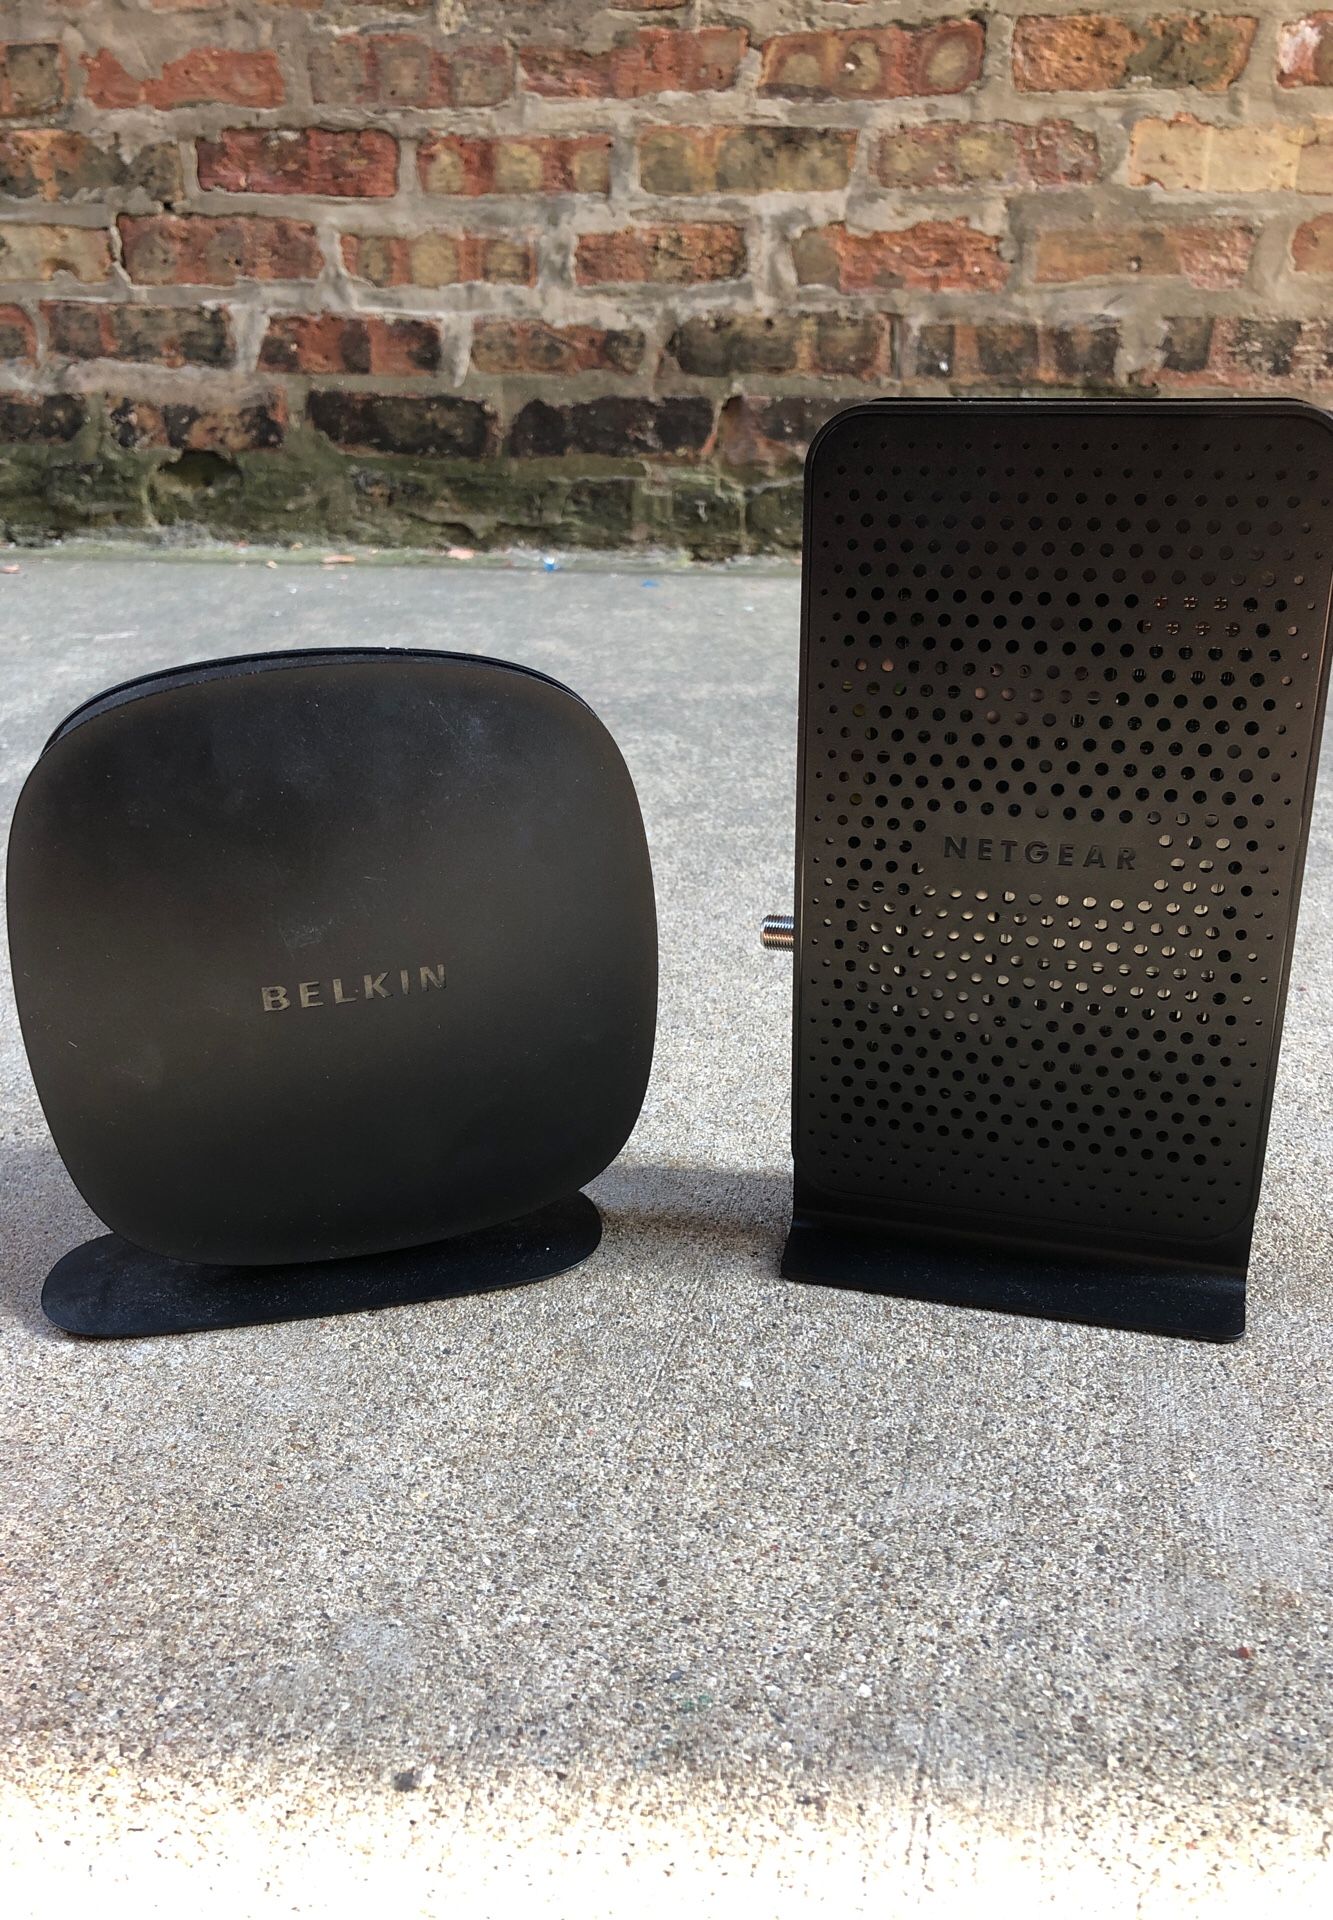 Belkin n150 wireless router and Netgear n300 WiFi cable modem router